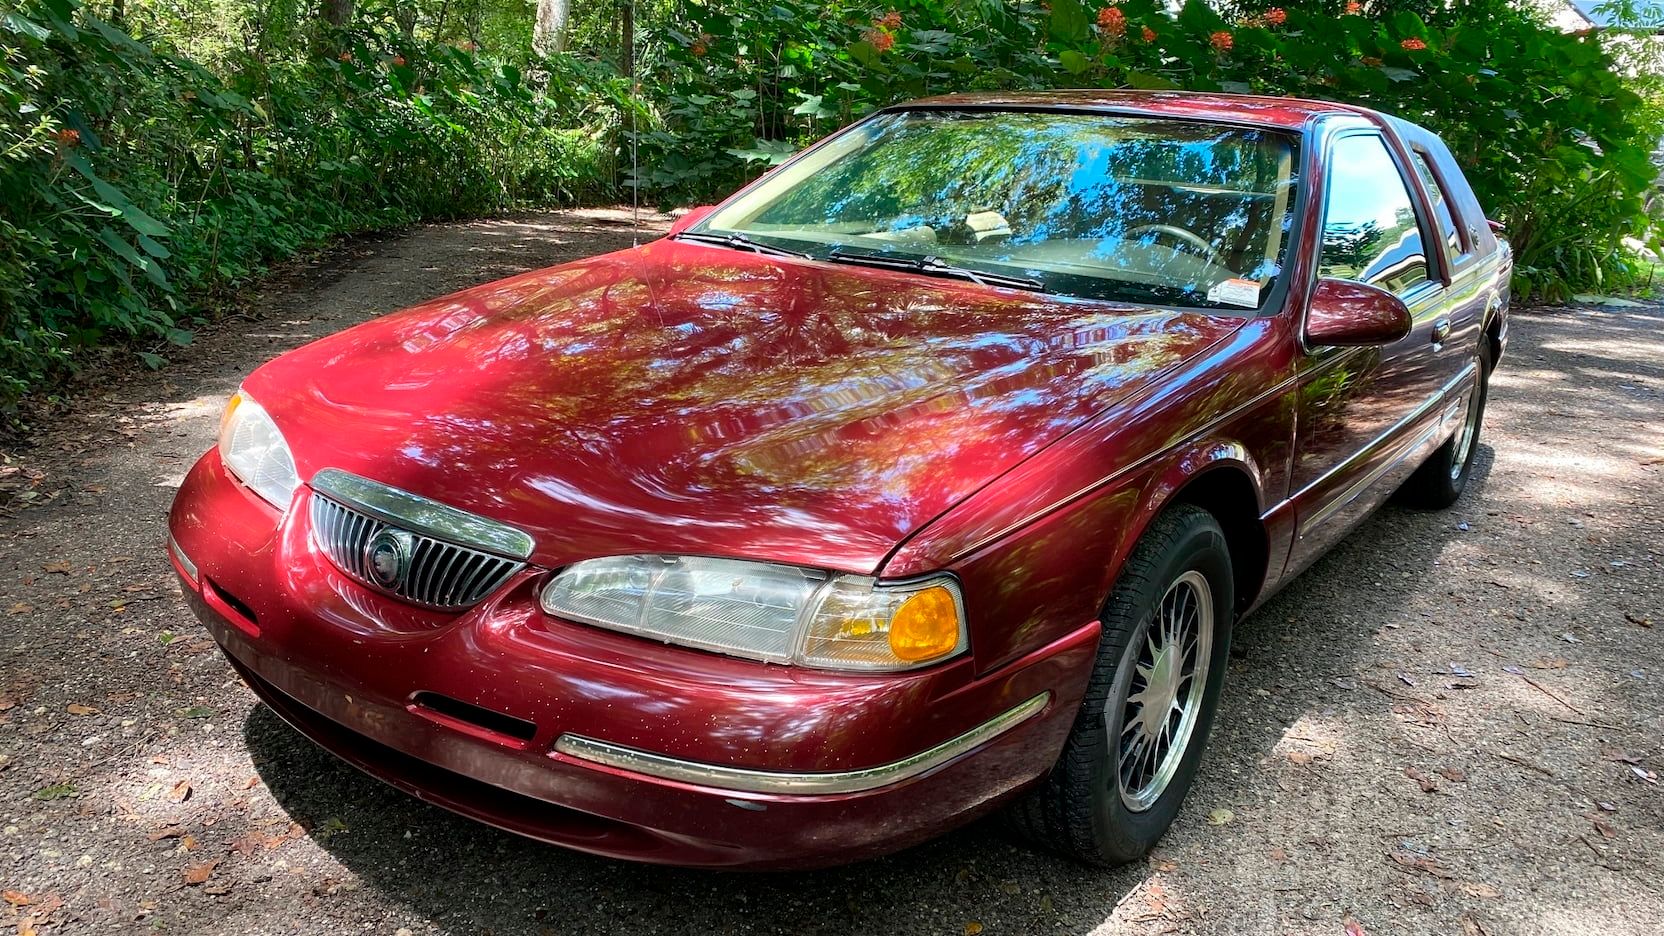 A parked 1997 Mercury Cougar XR-7 30th Anniversary Edition